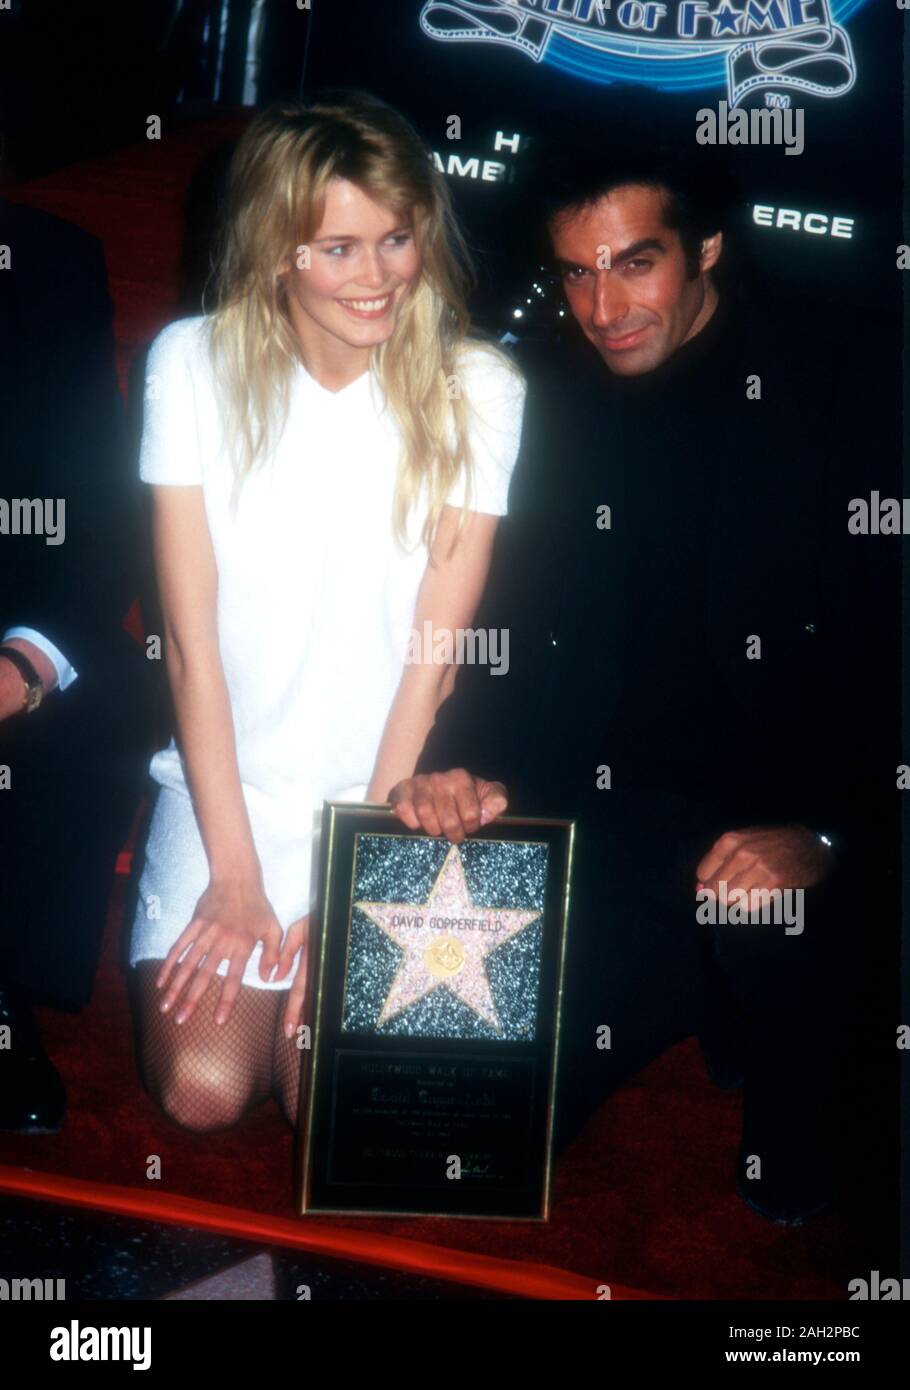 Hollywood, California, USA 25th April 1995 American Illusionist David Copperfield and model Claudia Schiffer attend David Copperfield's Hollywood Walk of Fame Star Ceremony on April 25, 1995 at 7001 Hollywood Blvd. in Hollywood, California, USA. Photo by Barry King/Alamy Stock Photo Stock Photo